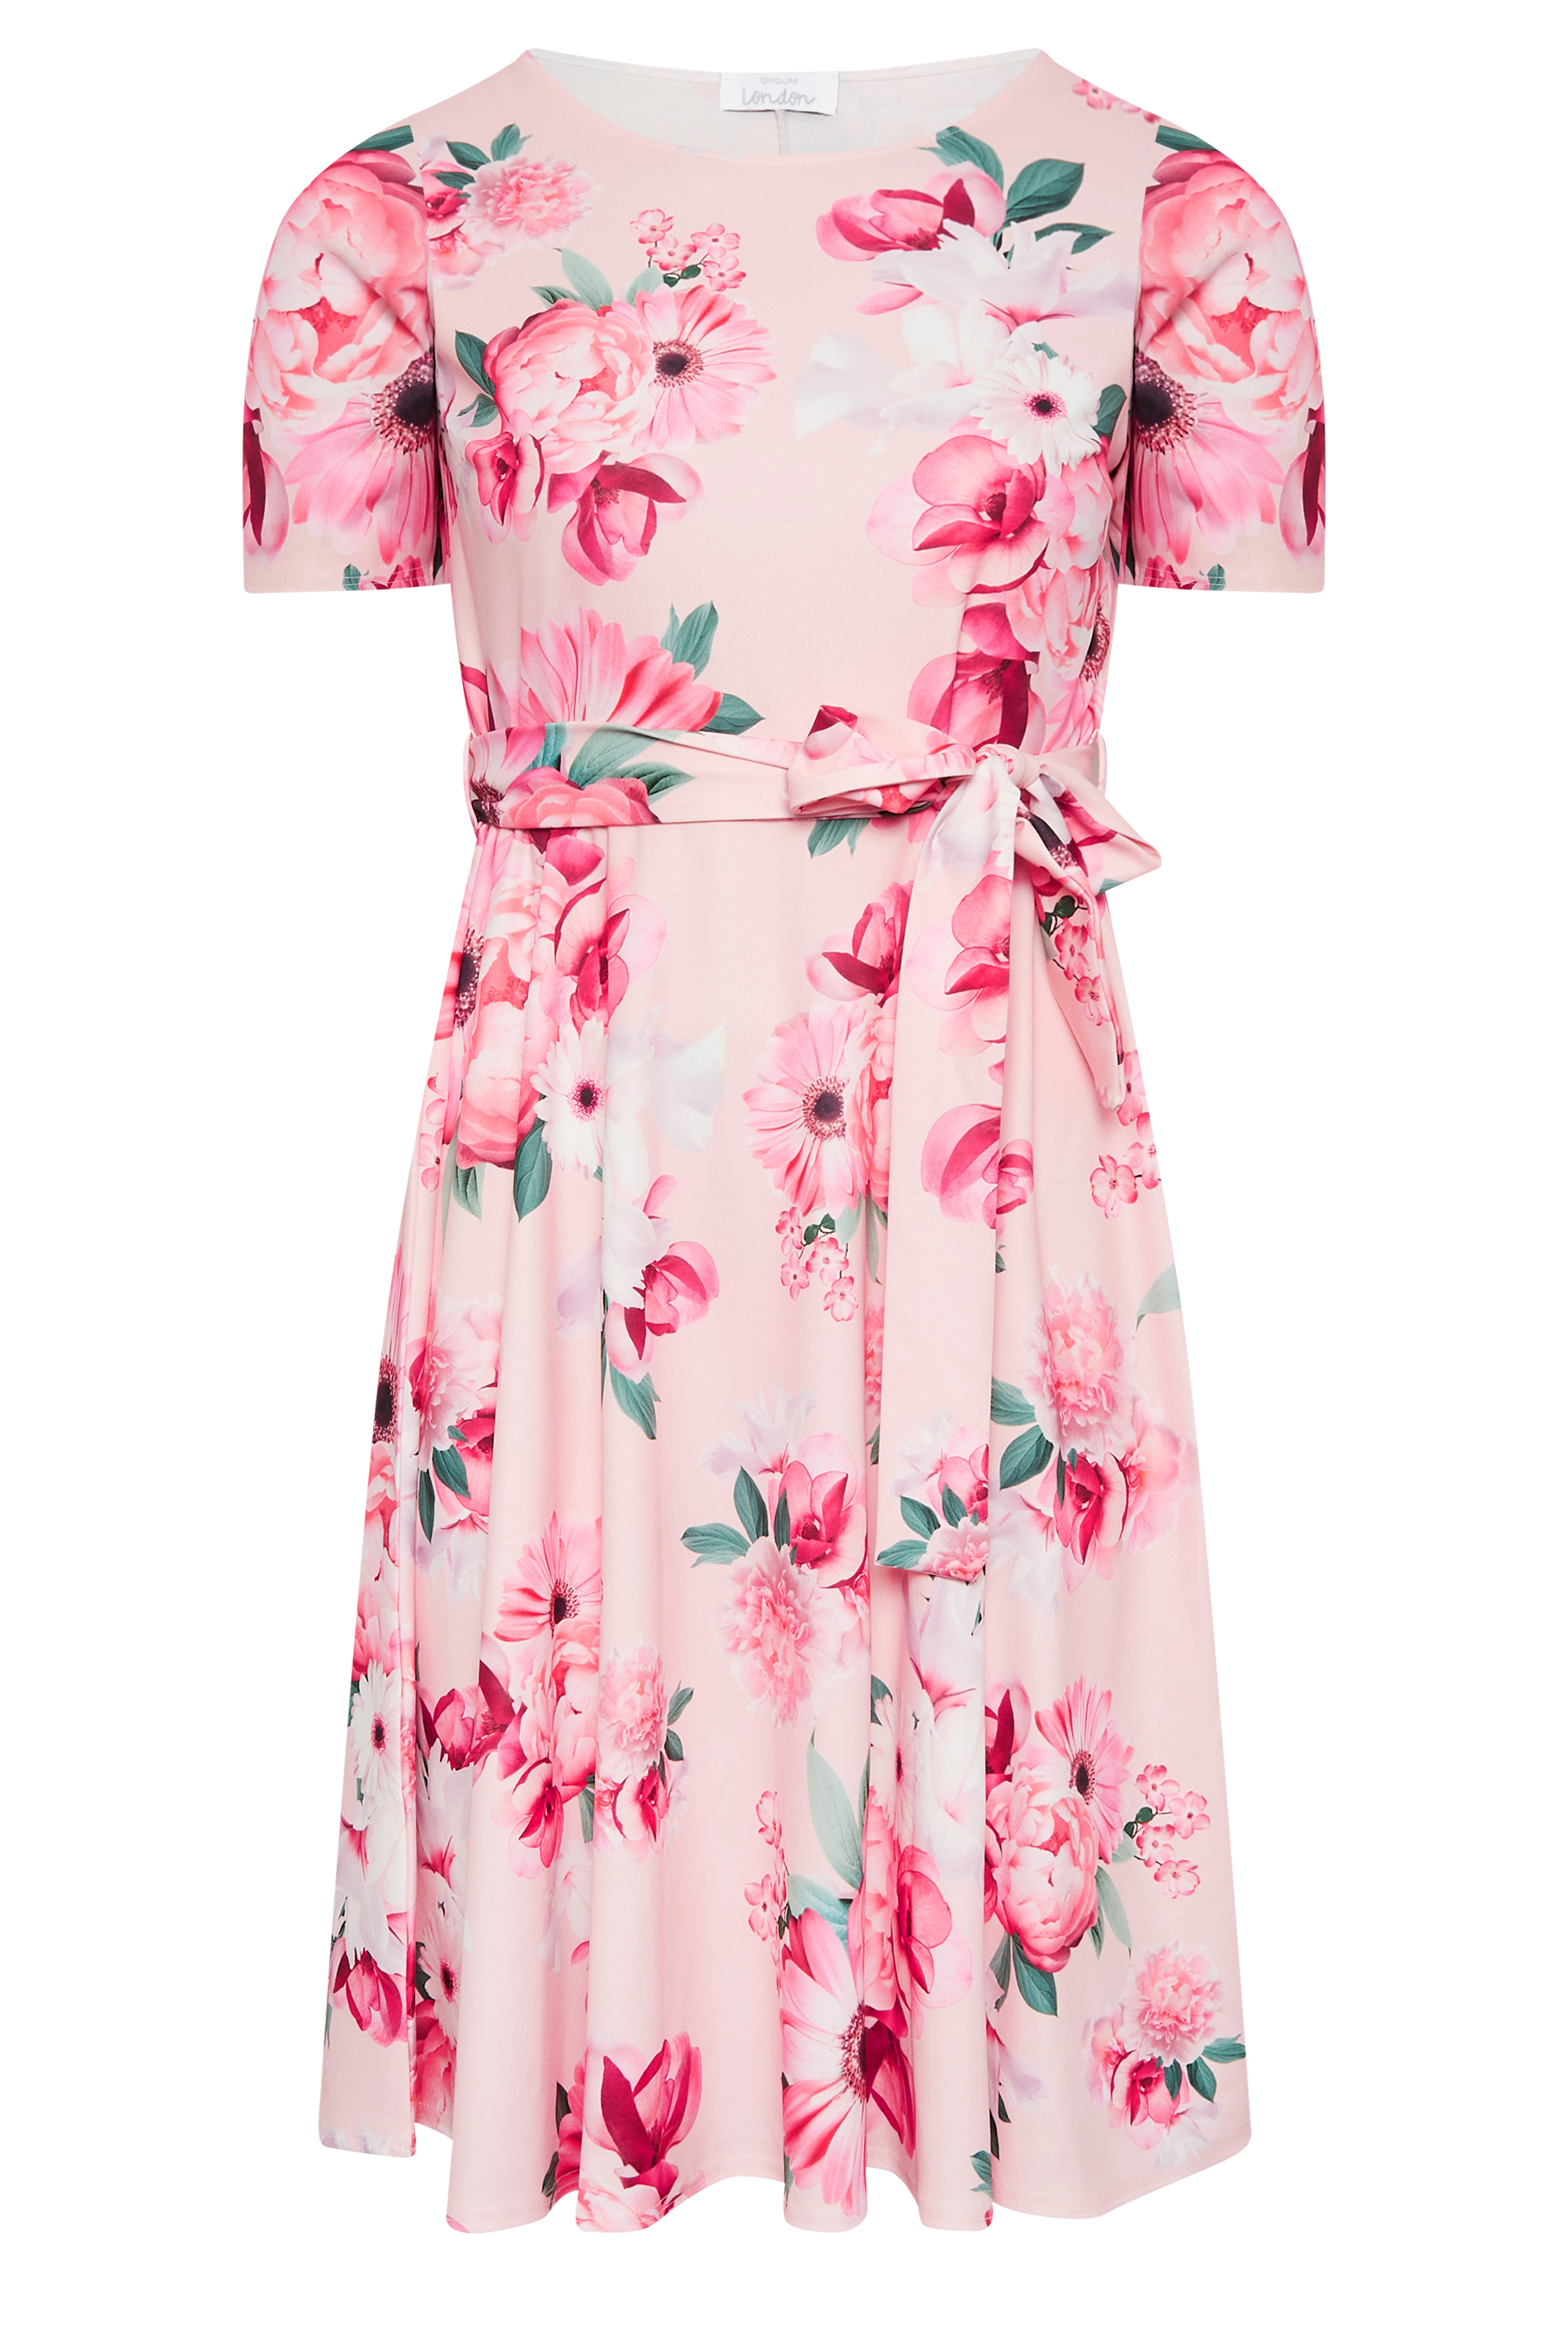 YOURS LONDON Plus Size Pink Floral Print Skater Dress | Yours Clothing